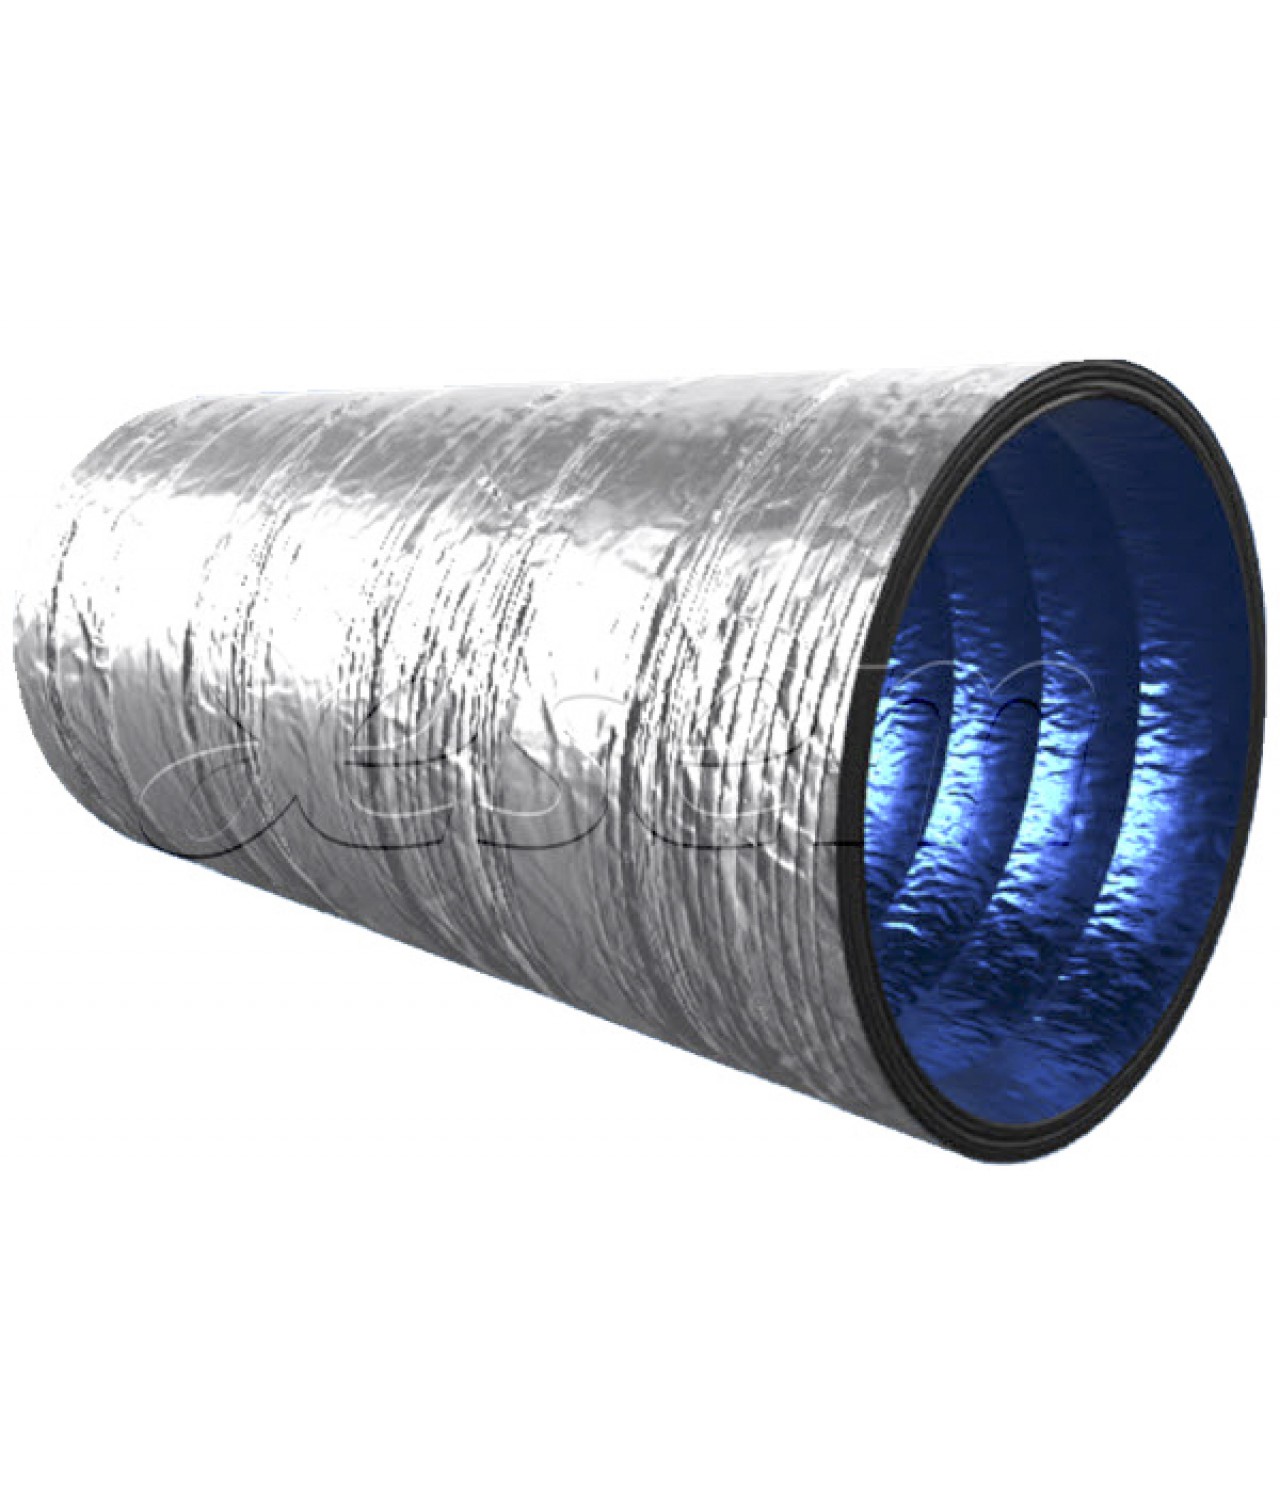 BIOISOVENT - antibacterial insulated flexible duct 7.5 m, 150 °C